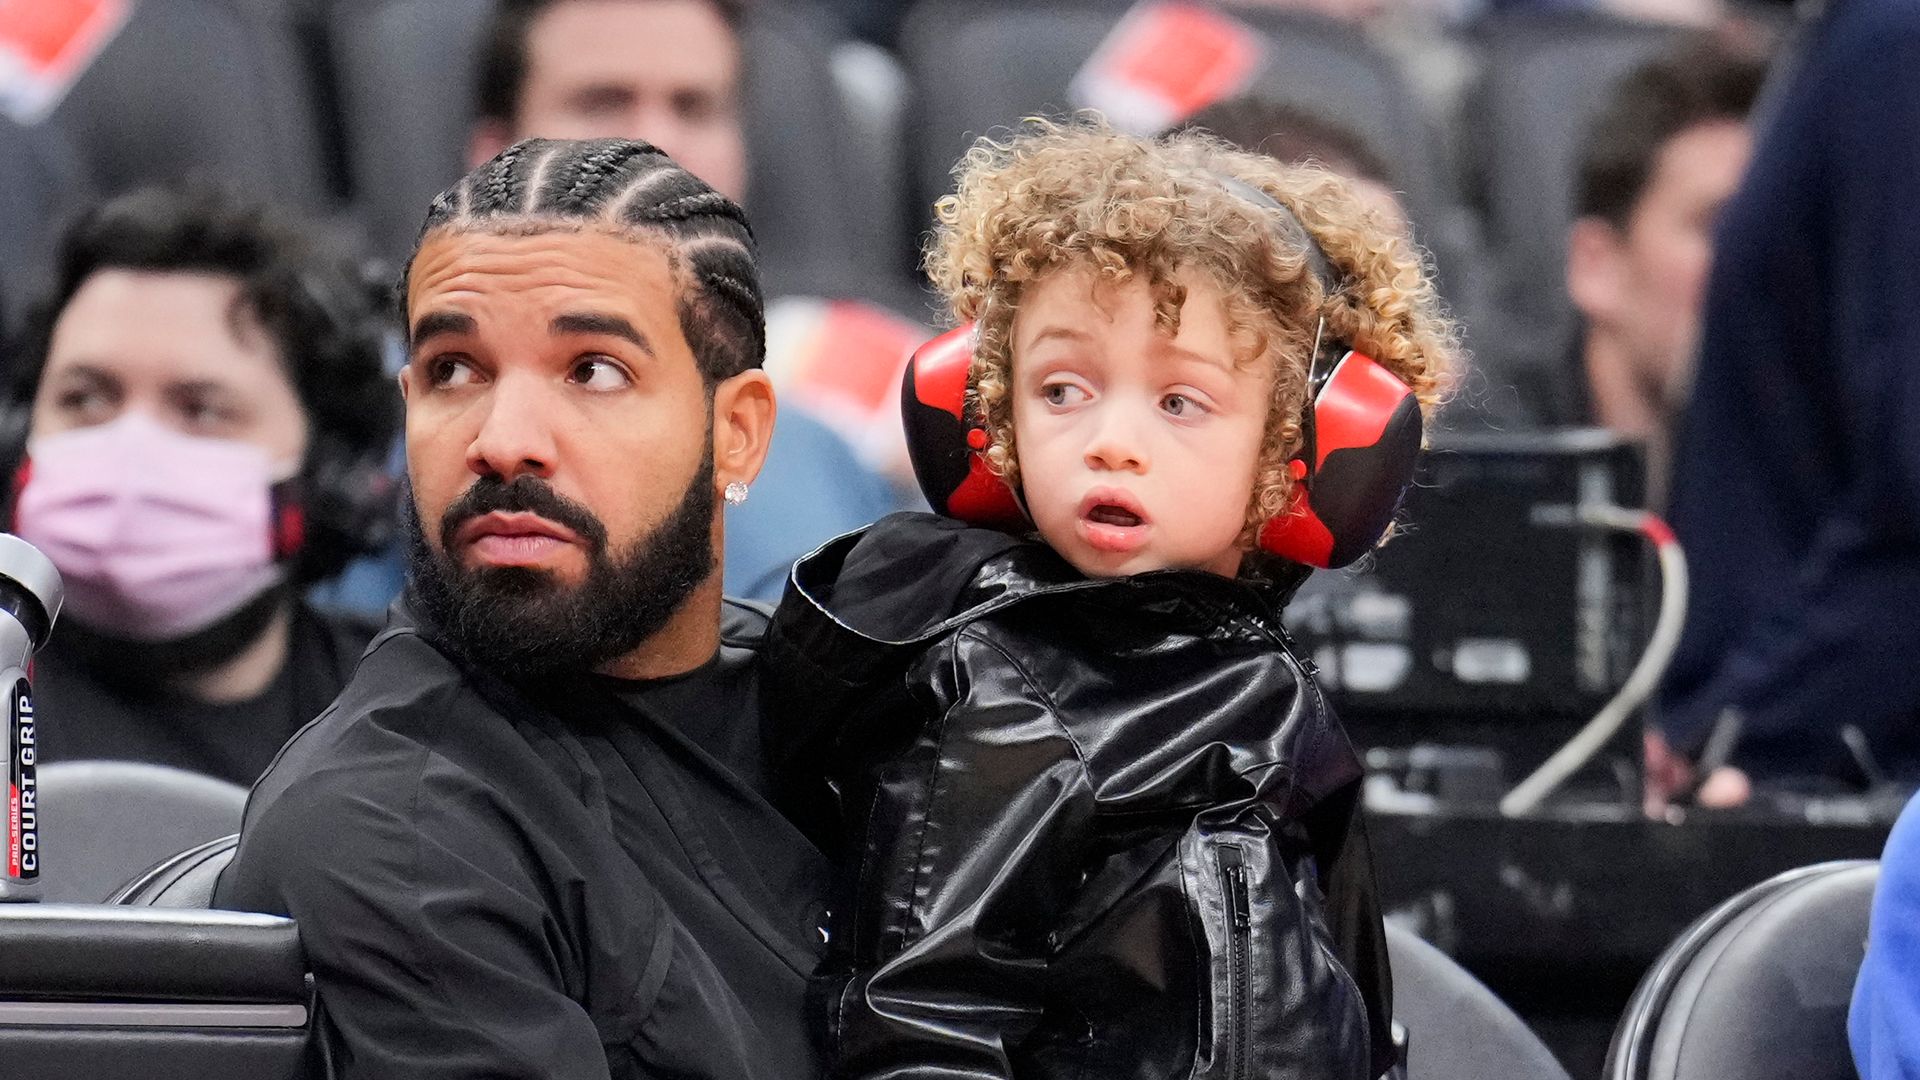 Meet Drake's son Adonis: all about his mom Sophie Brussaux and the diss track that revealed his identity